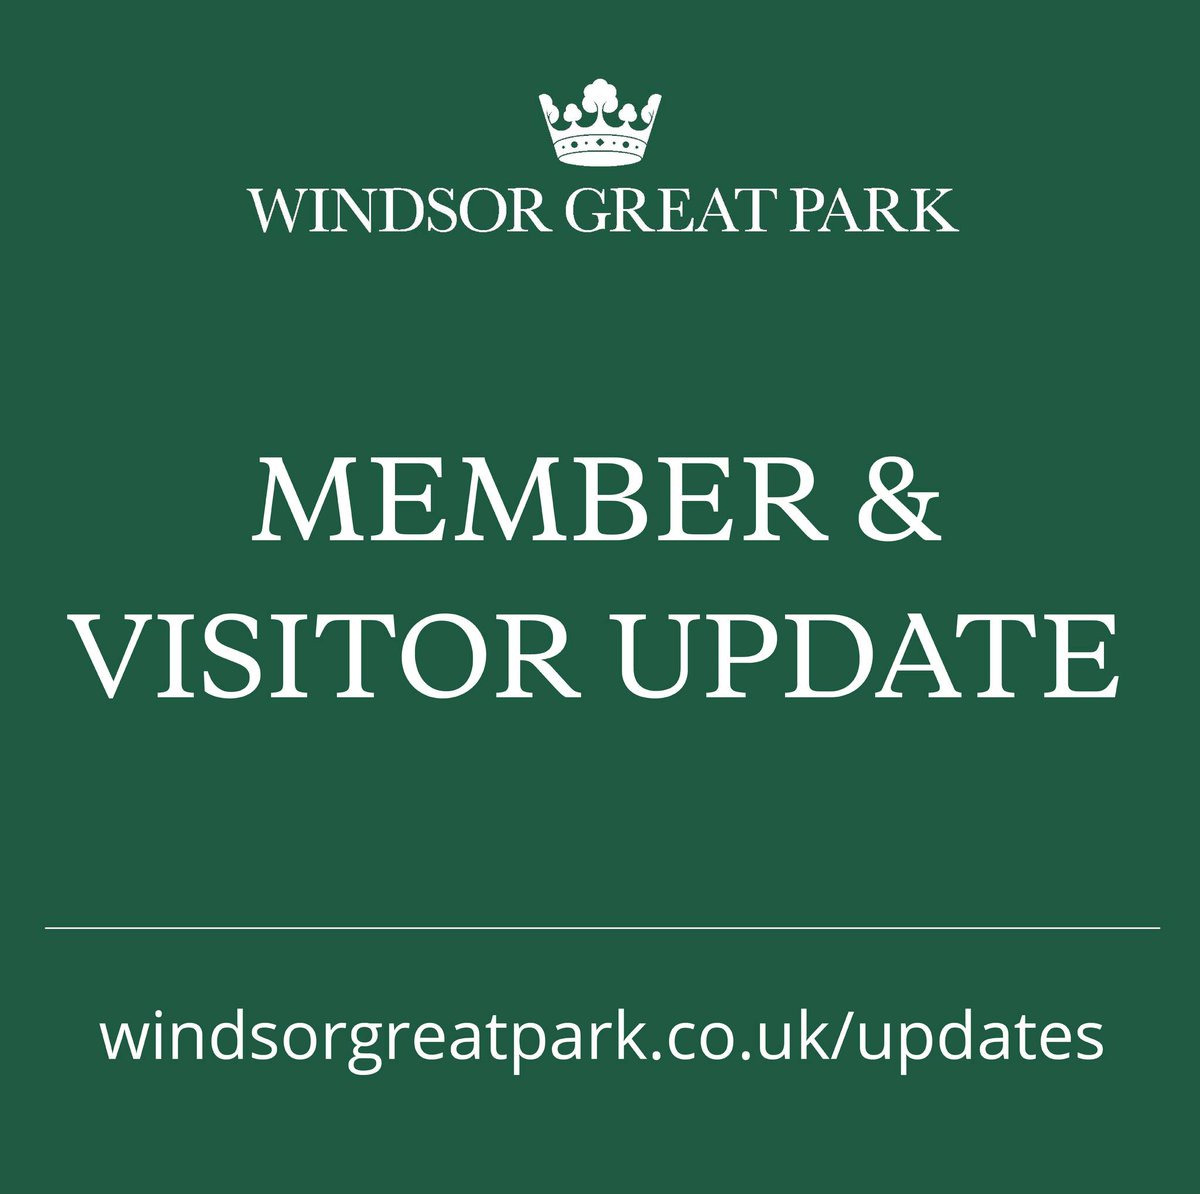 Please be aware of closures and restrictions beginning on Tuesday 7 May for operational reasons. These restrictions may impact your visit, please check our visitor updates for more information: windsorgreatpark.co.uk/visitorupdates @visitwindsor @MyRoyalBorough